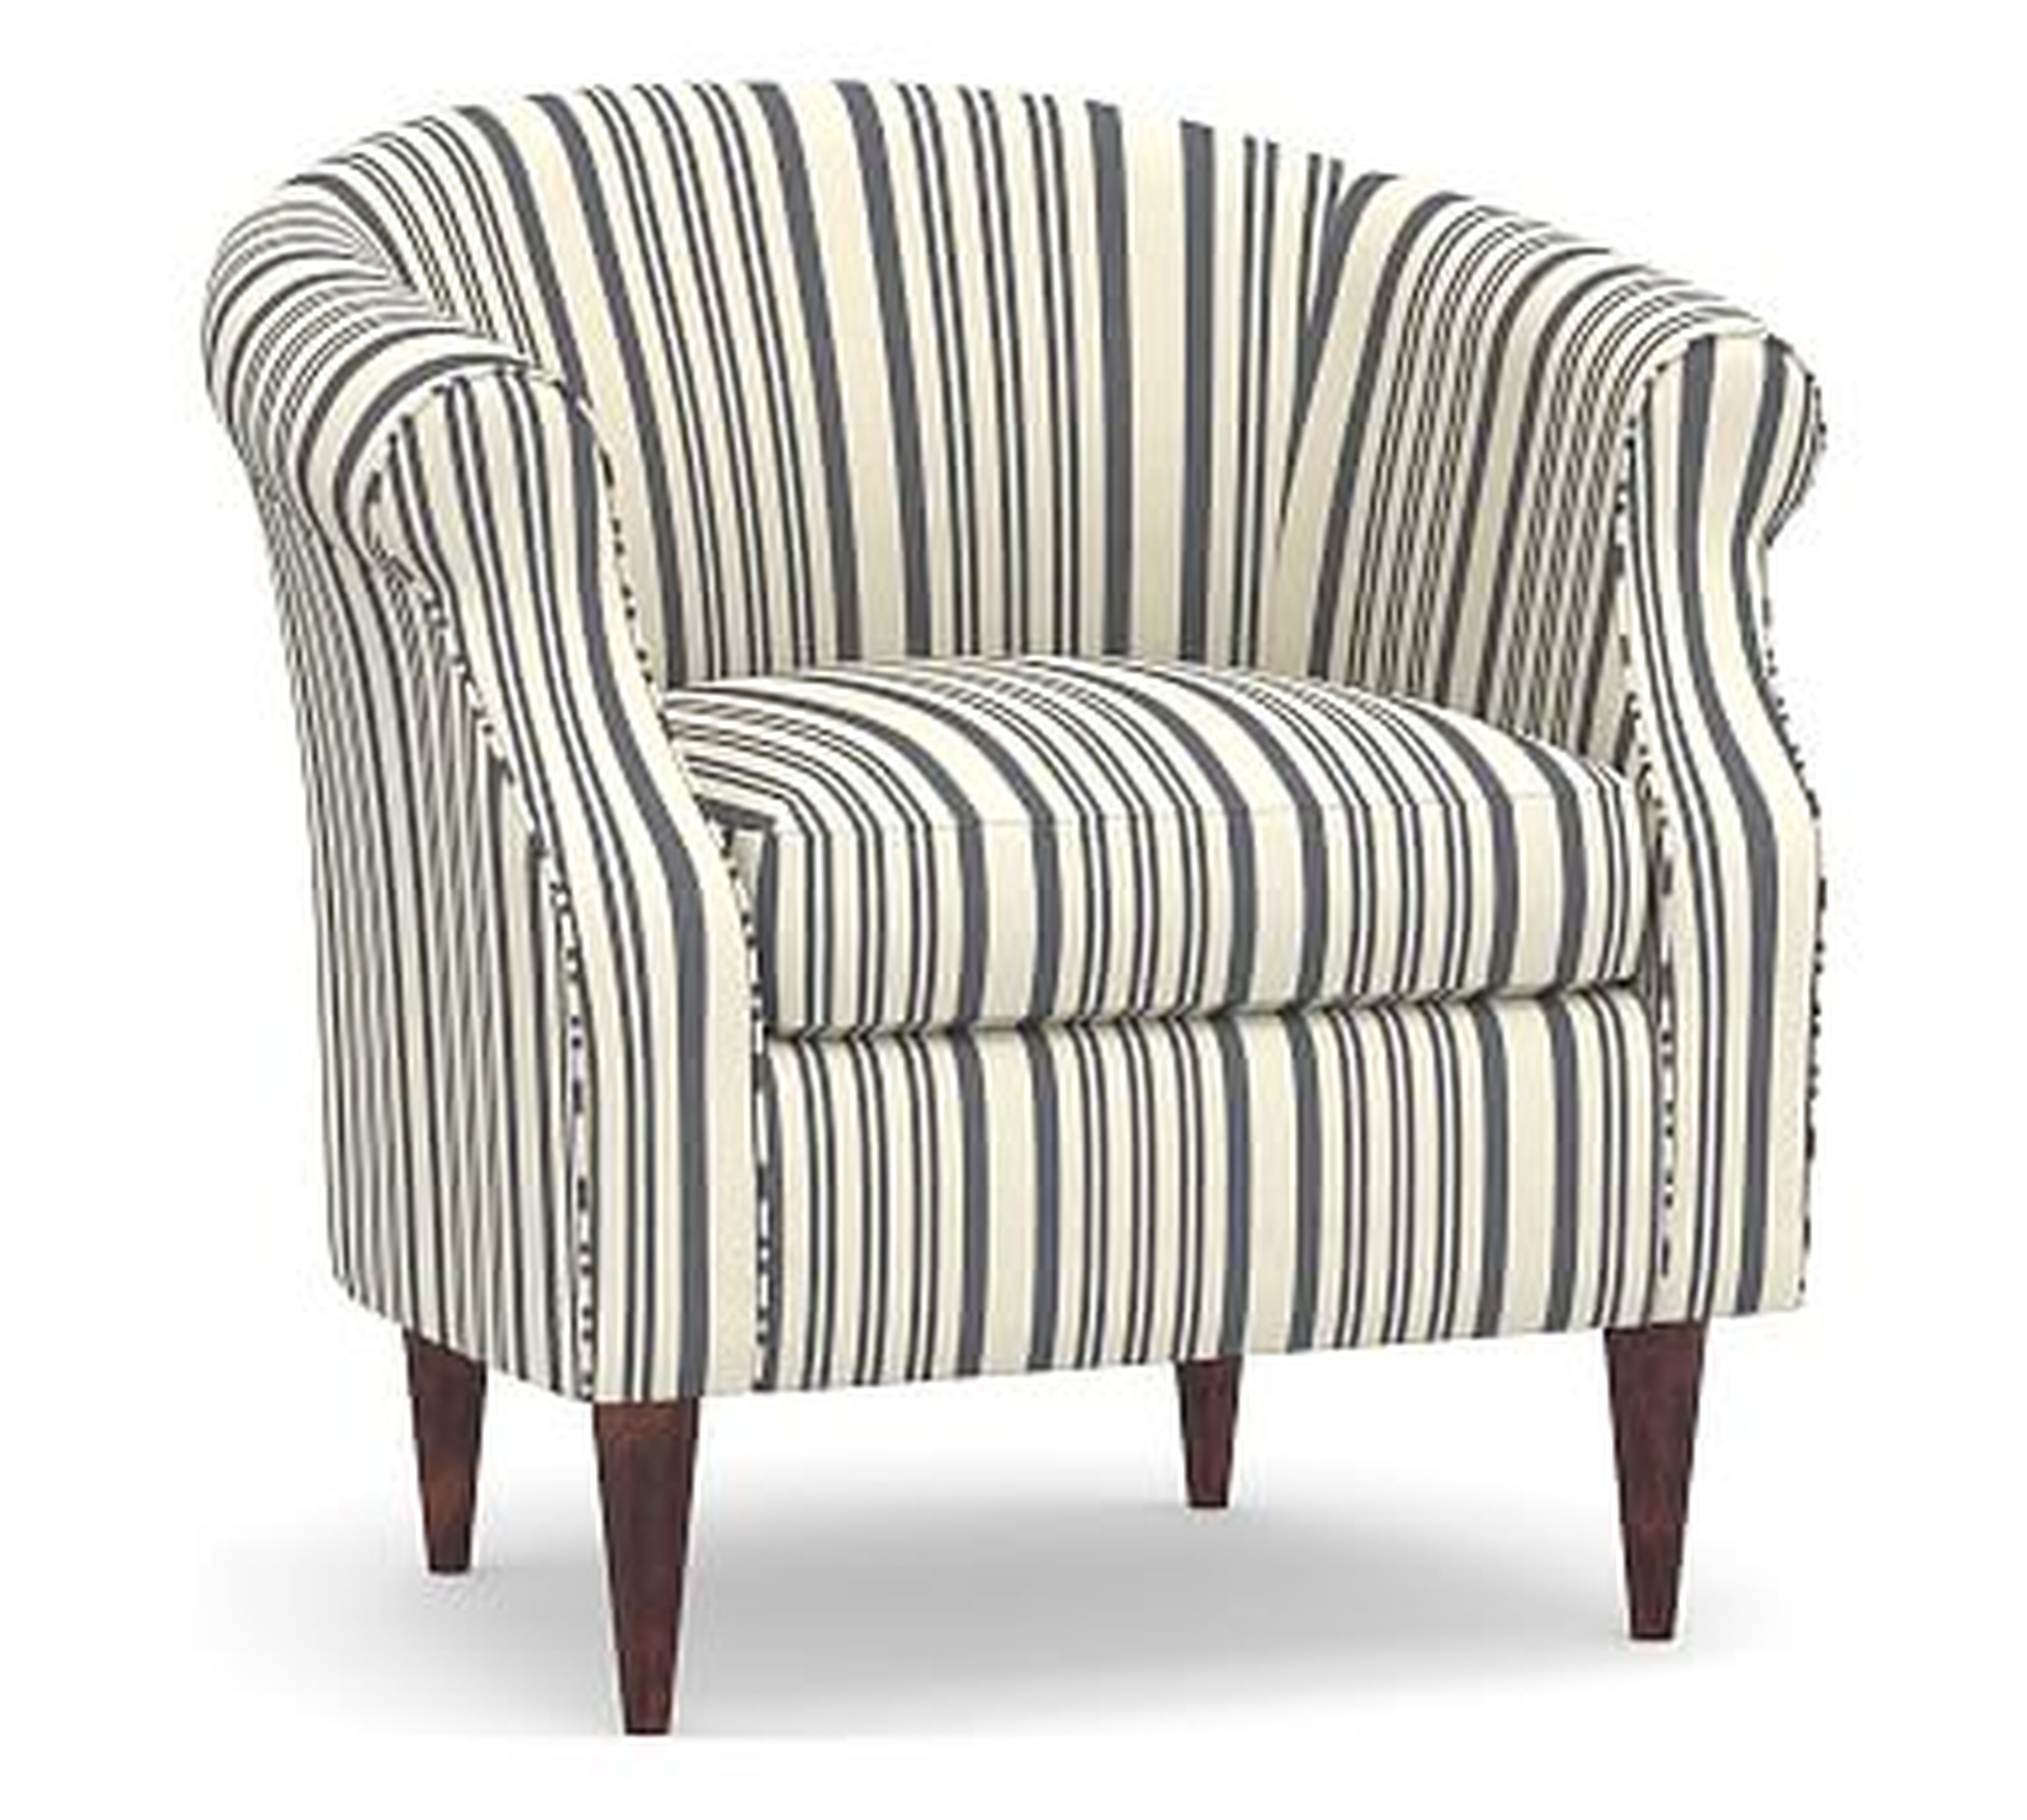 SoMa Lyndon Upholstered Armchair, Polyester Wrapped Cushions, Antique Stripe Gray - Pottery Barn